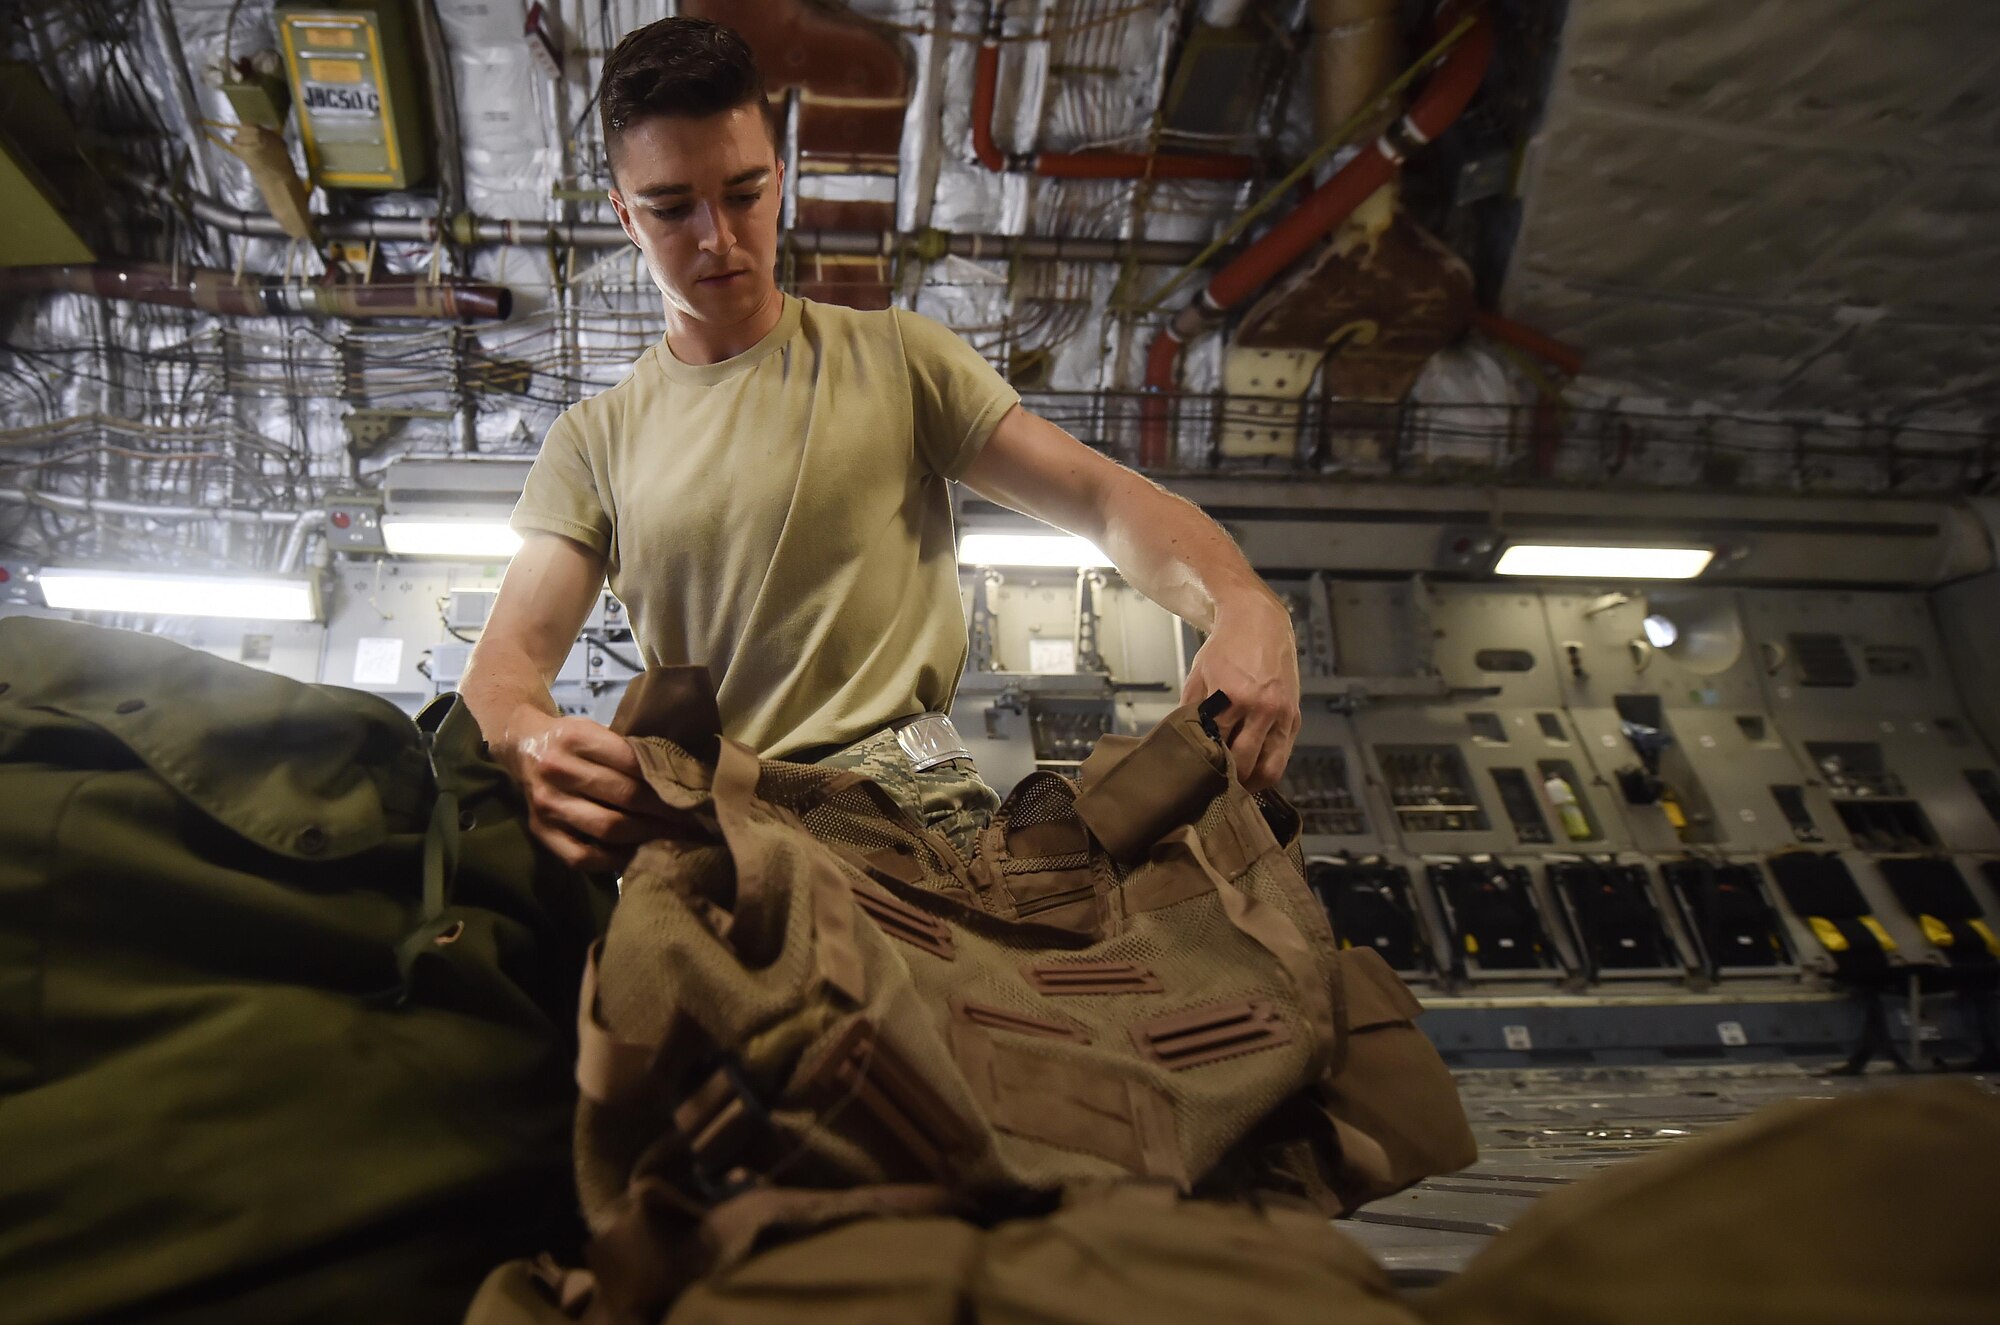 Airman 1st Class Travis Neal, 437th Operations Support Squadron aircrew flight equipment apprentice, packs survival vests and oxygen masks on board a C-17 Globemaster III as part of an inspection at Joint Base Charleston, S.C., June 22. Airmen assigned to the 437th OSS AFE flight ensure that aircrew equipment including helmets, oxygen masks, life rafts, and parachutes are safe and ready for aircrew members to operate. (U.S. Air Force photo by Staff Sgt. Christopher Hubenthal) 